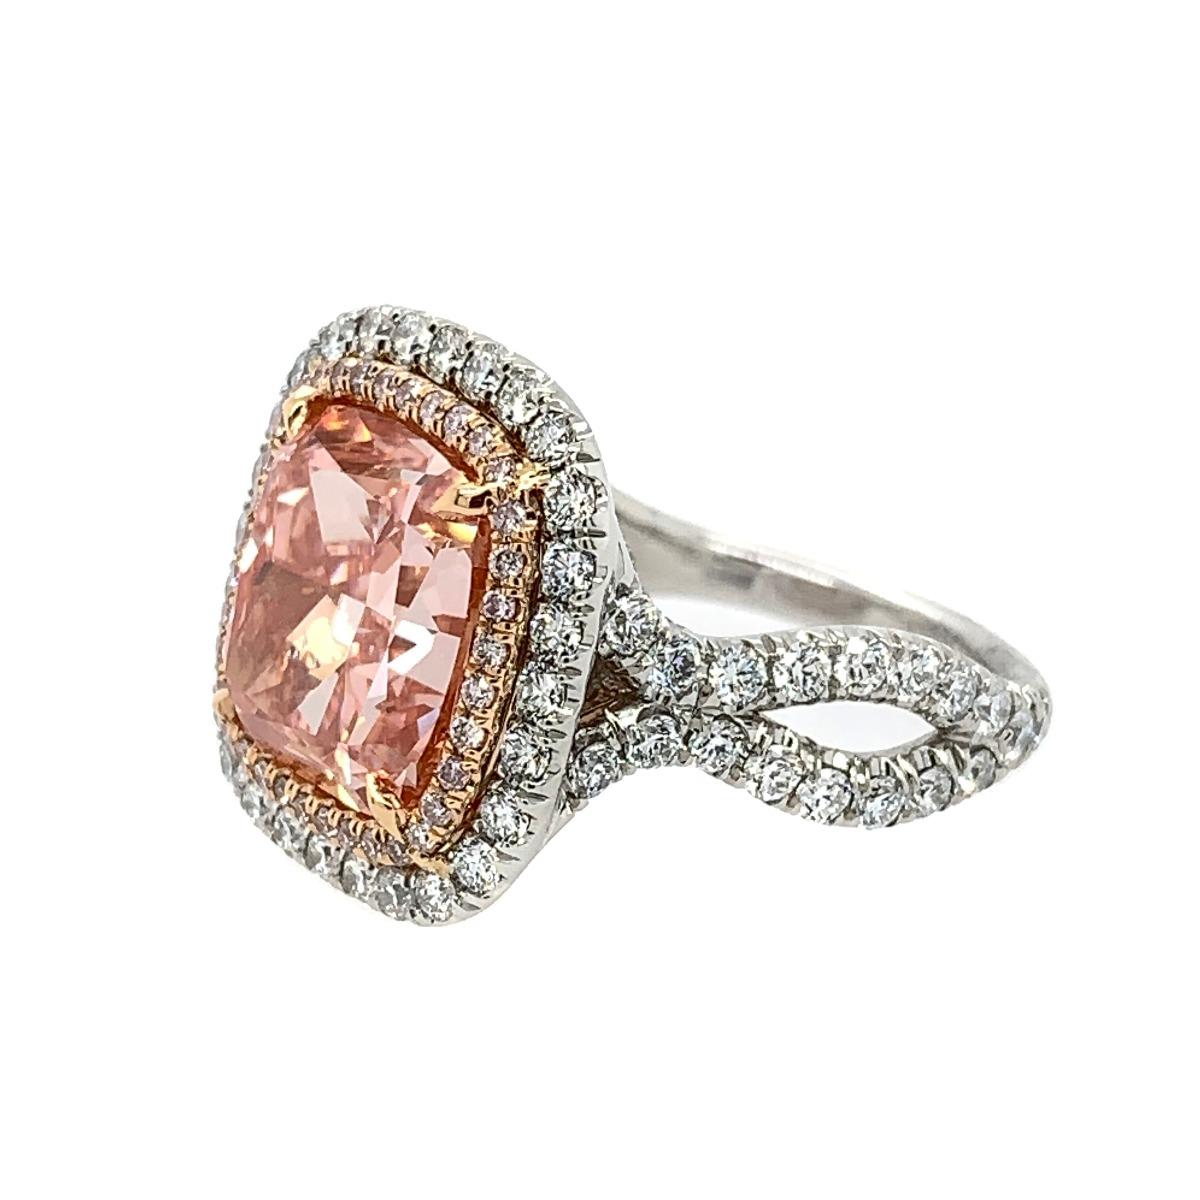 Glc0071:


Plat & 18k rose gold:

Center: 8.05ct Cushion cut

Color HPHT Fancy Intense Pink

VVS

Accent dia: 1.72ct pink and white.

GIA certificate